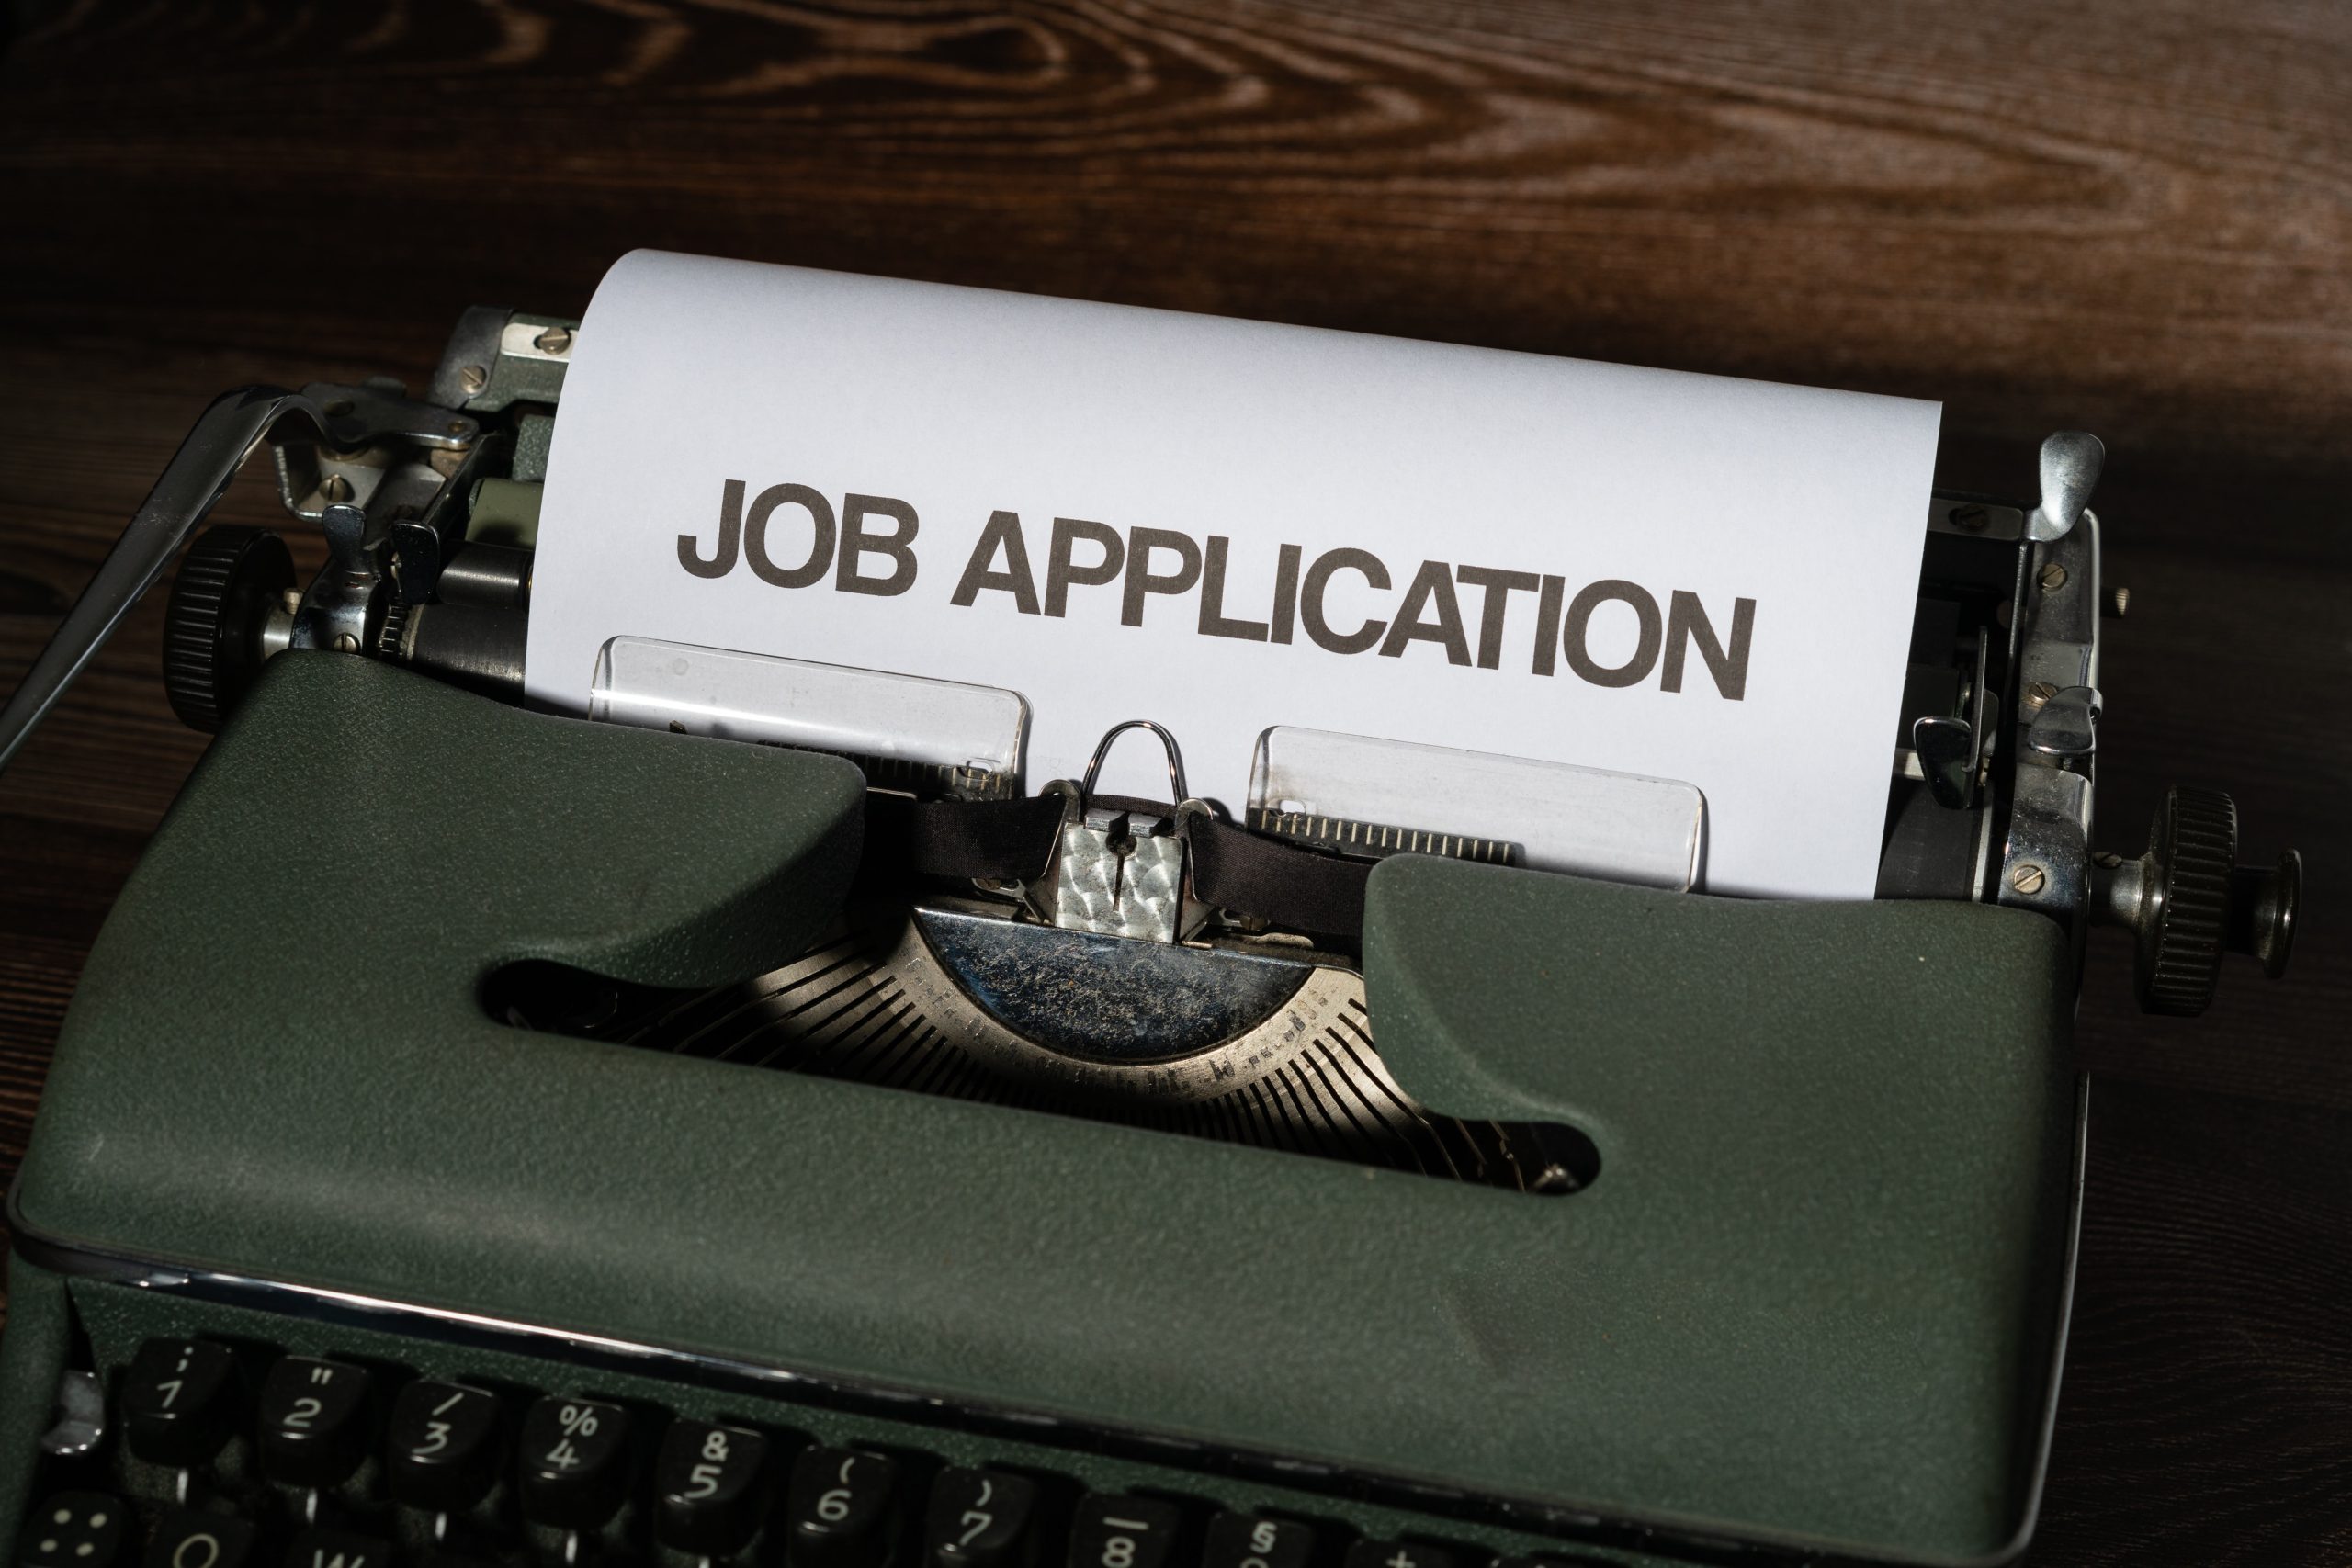 A typewriter with the words "Job Application" written on a piece of paper